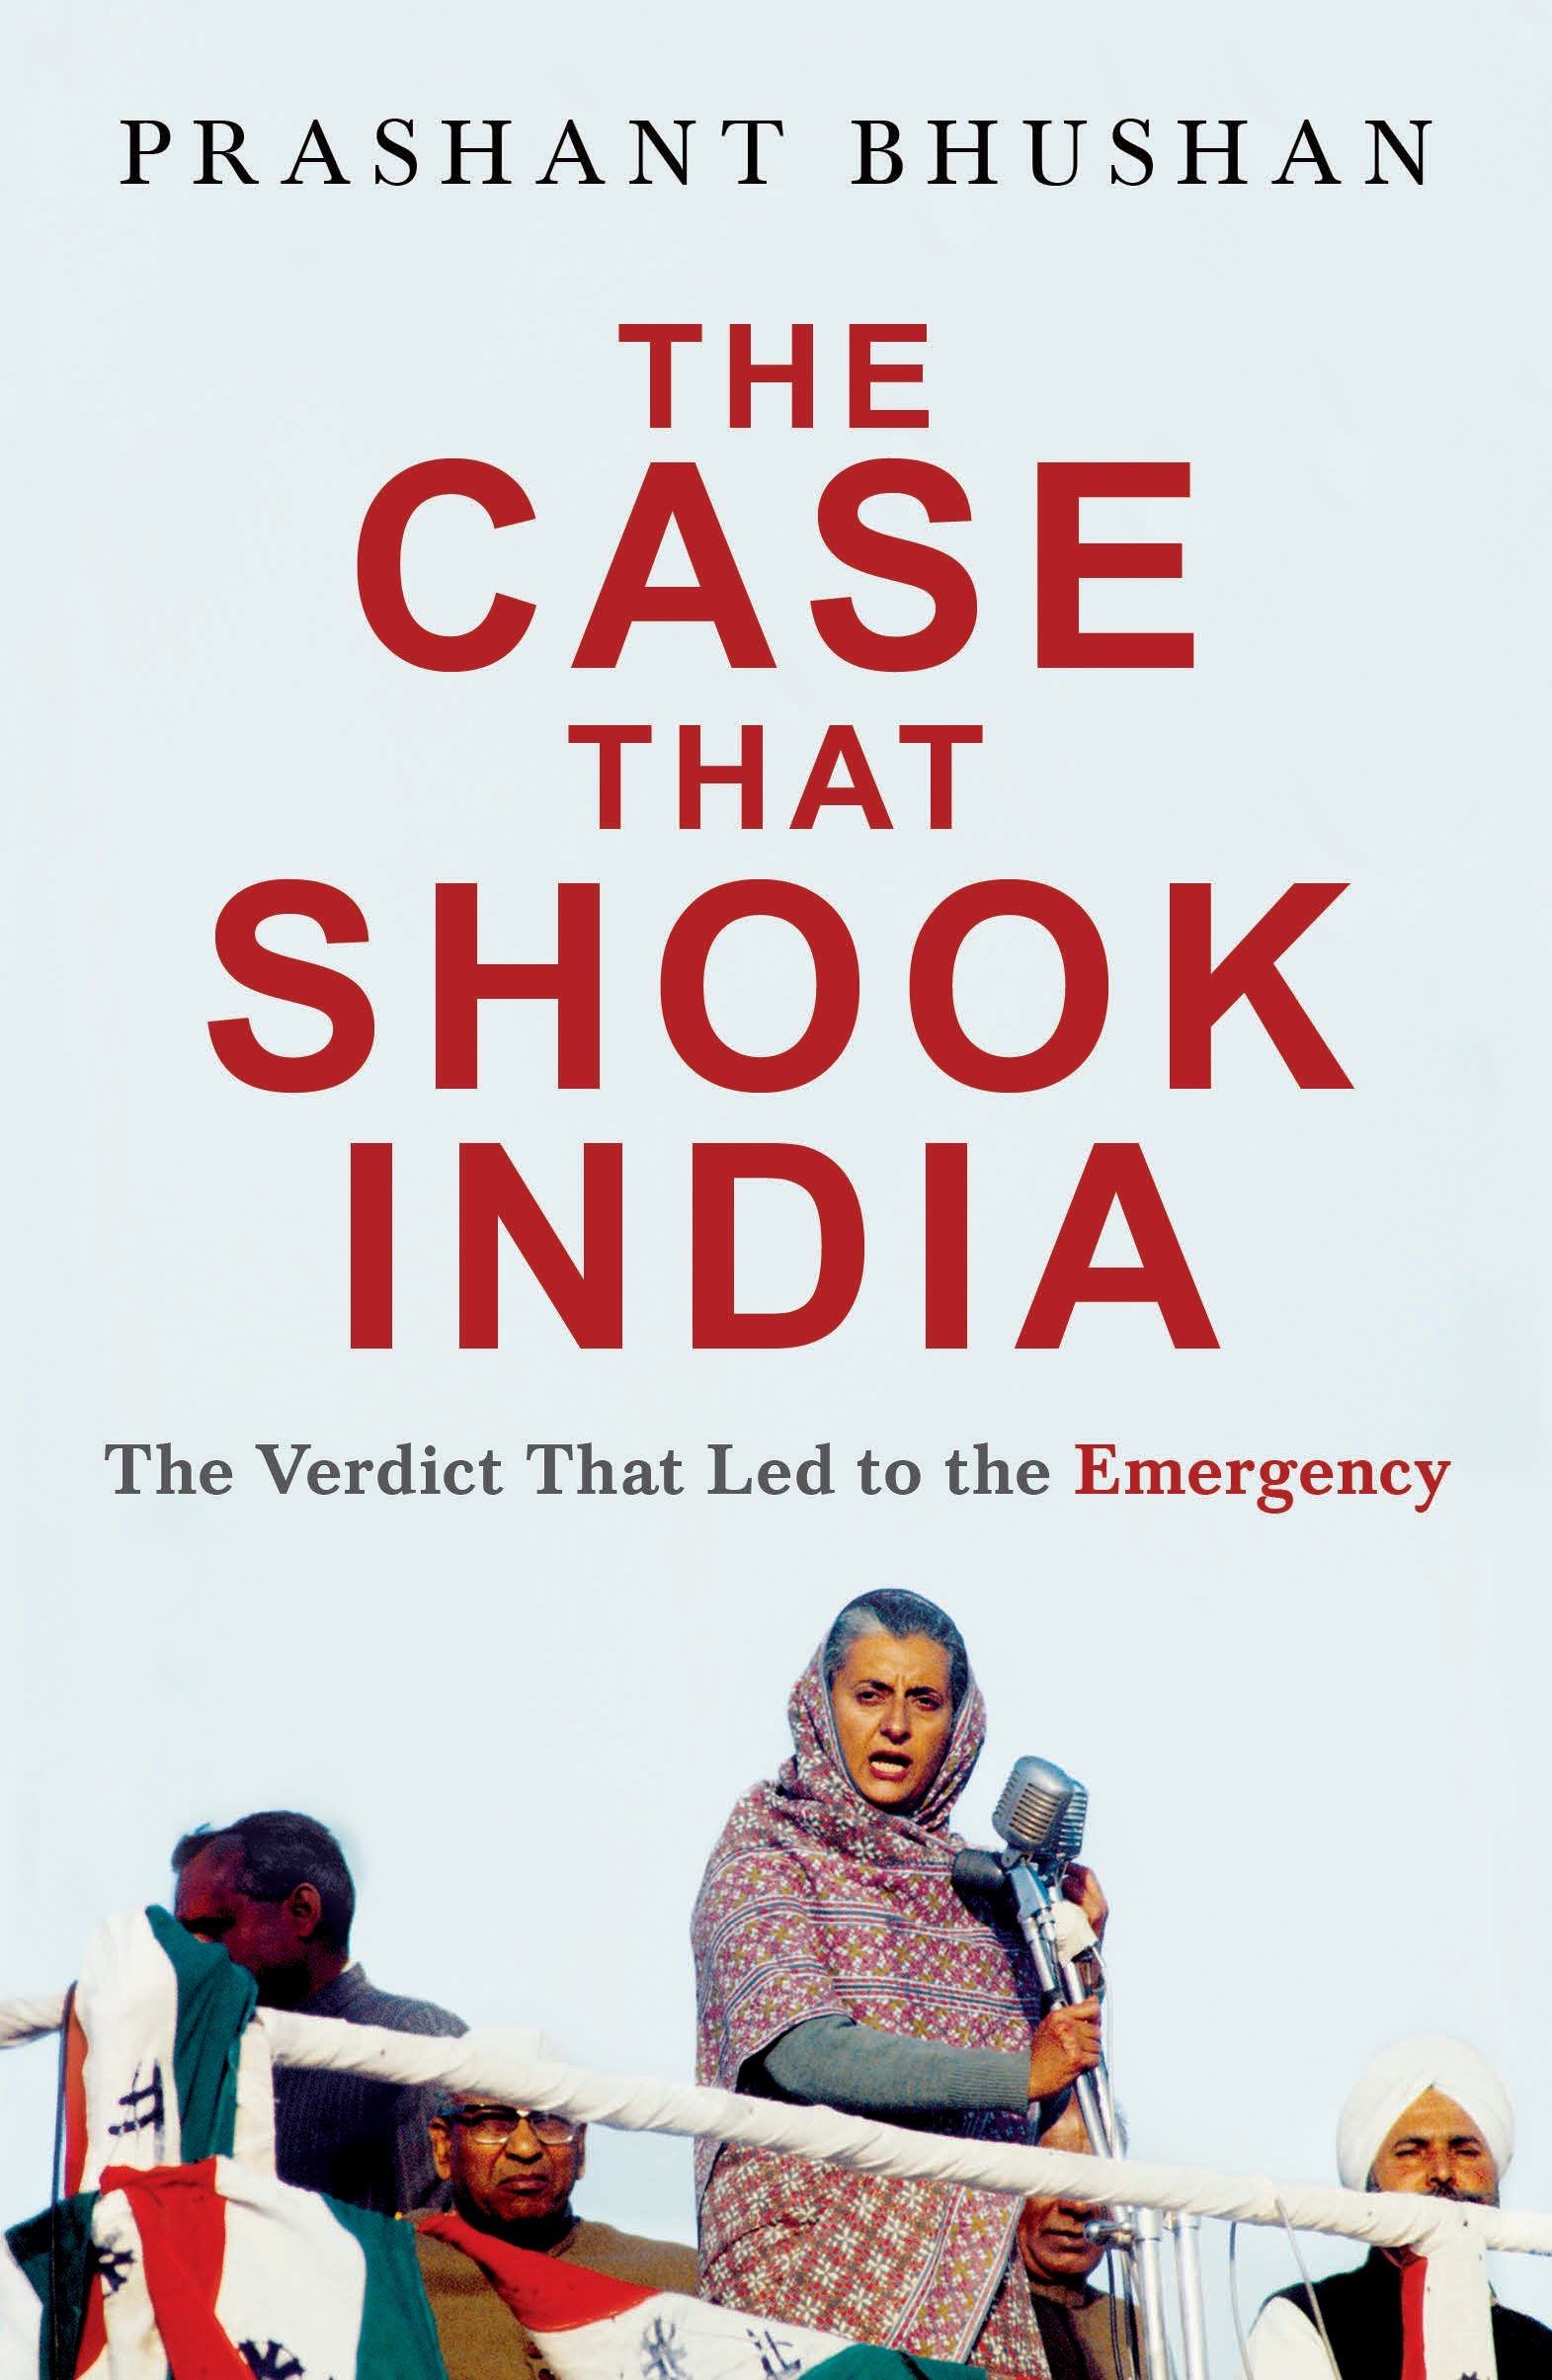 The Case That Shook India - The Verdict That Led to Emergency by Prashant Bhushan (Book Review)